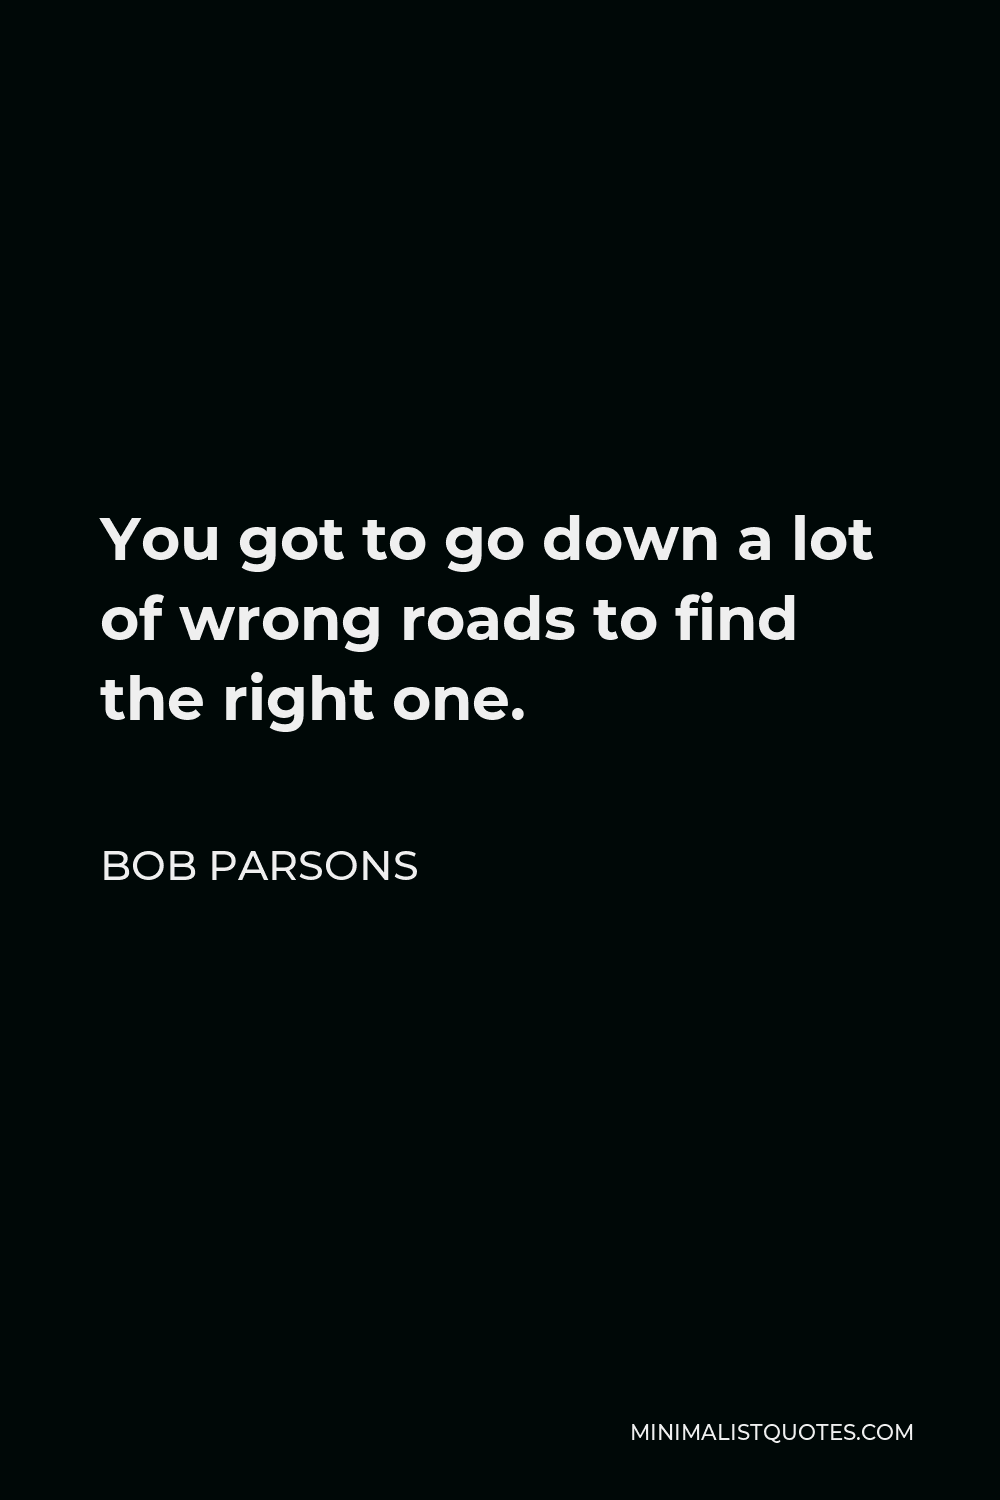 Bob Parsons Quote - You got to go down a lot of wrong roads to find the right one.